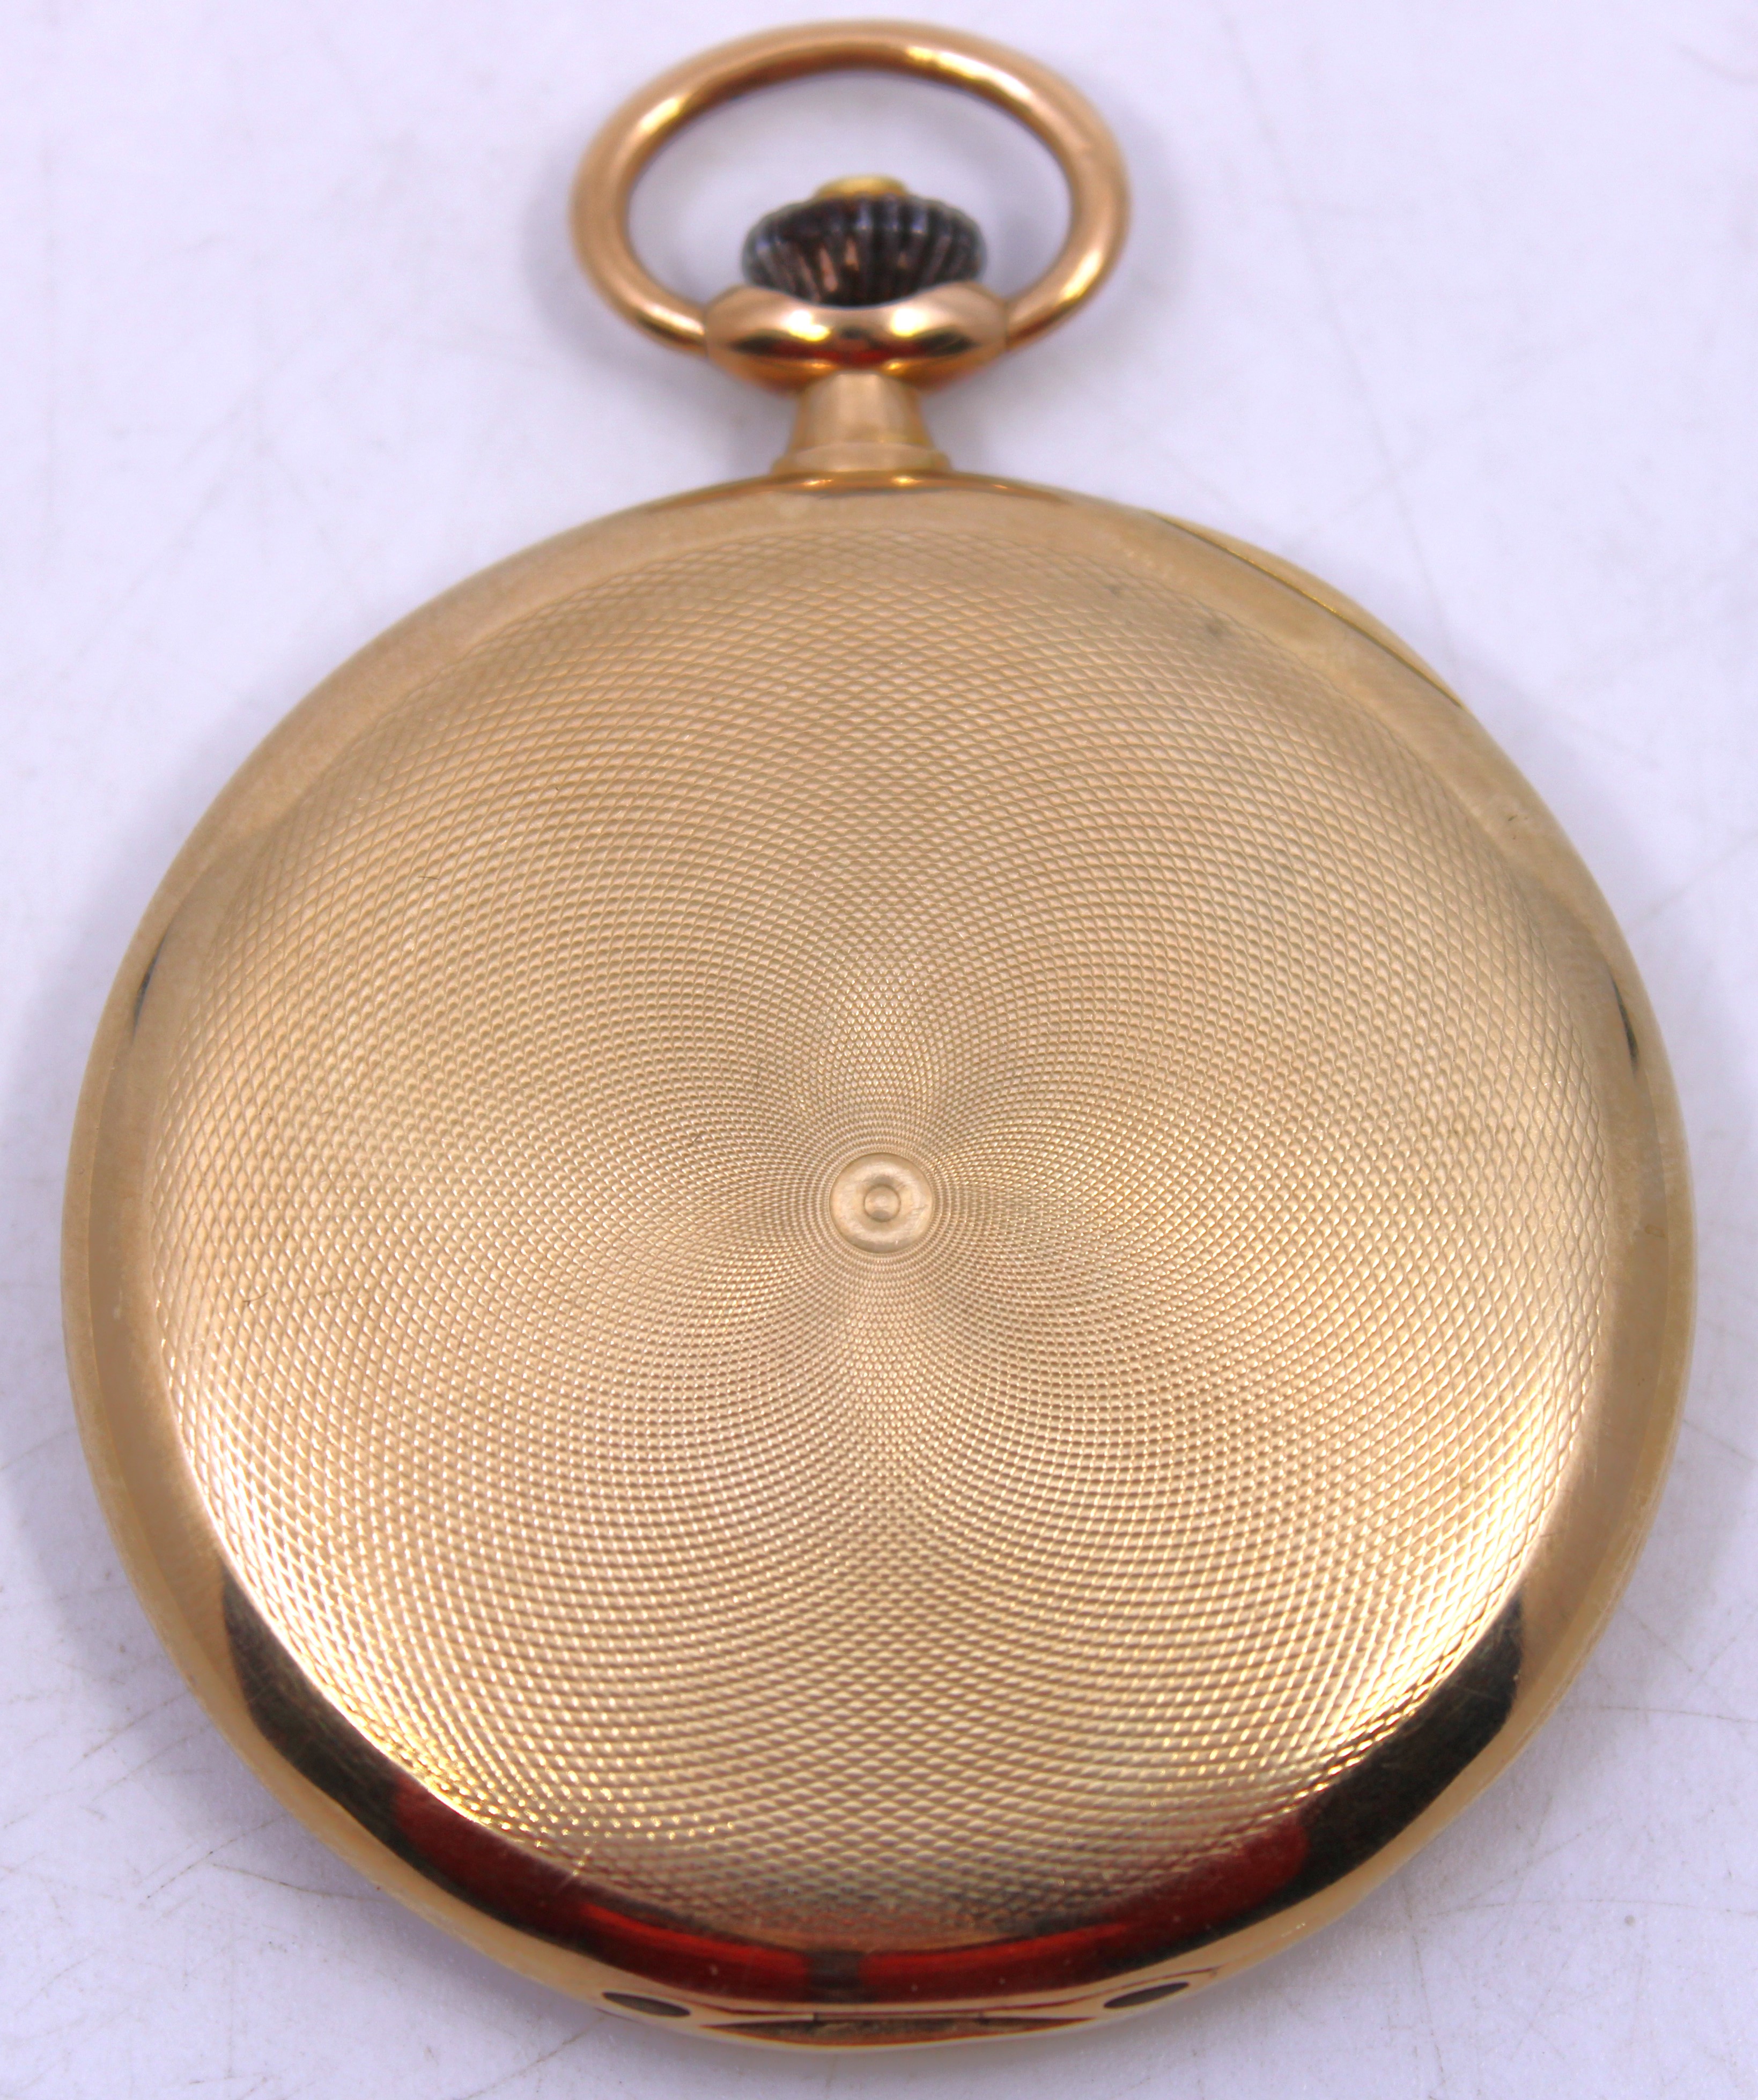 14ct Yellow Gold Pocket Watch. The Pocket Watch is hallmarked "14K" and "0,585" for 14ct Gold on the - Image 2 of 3